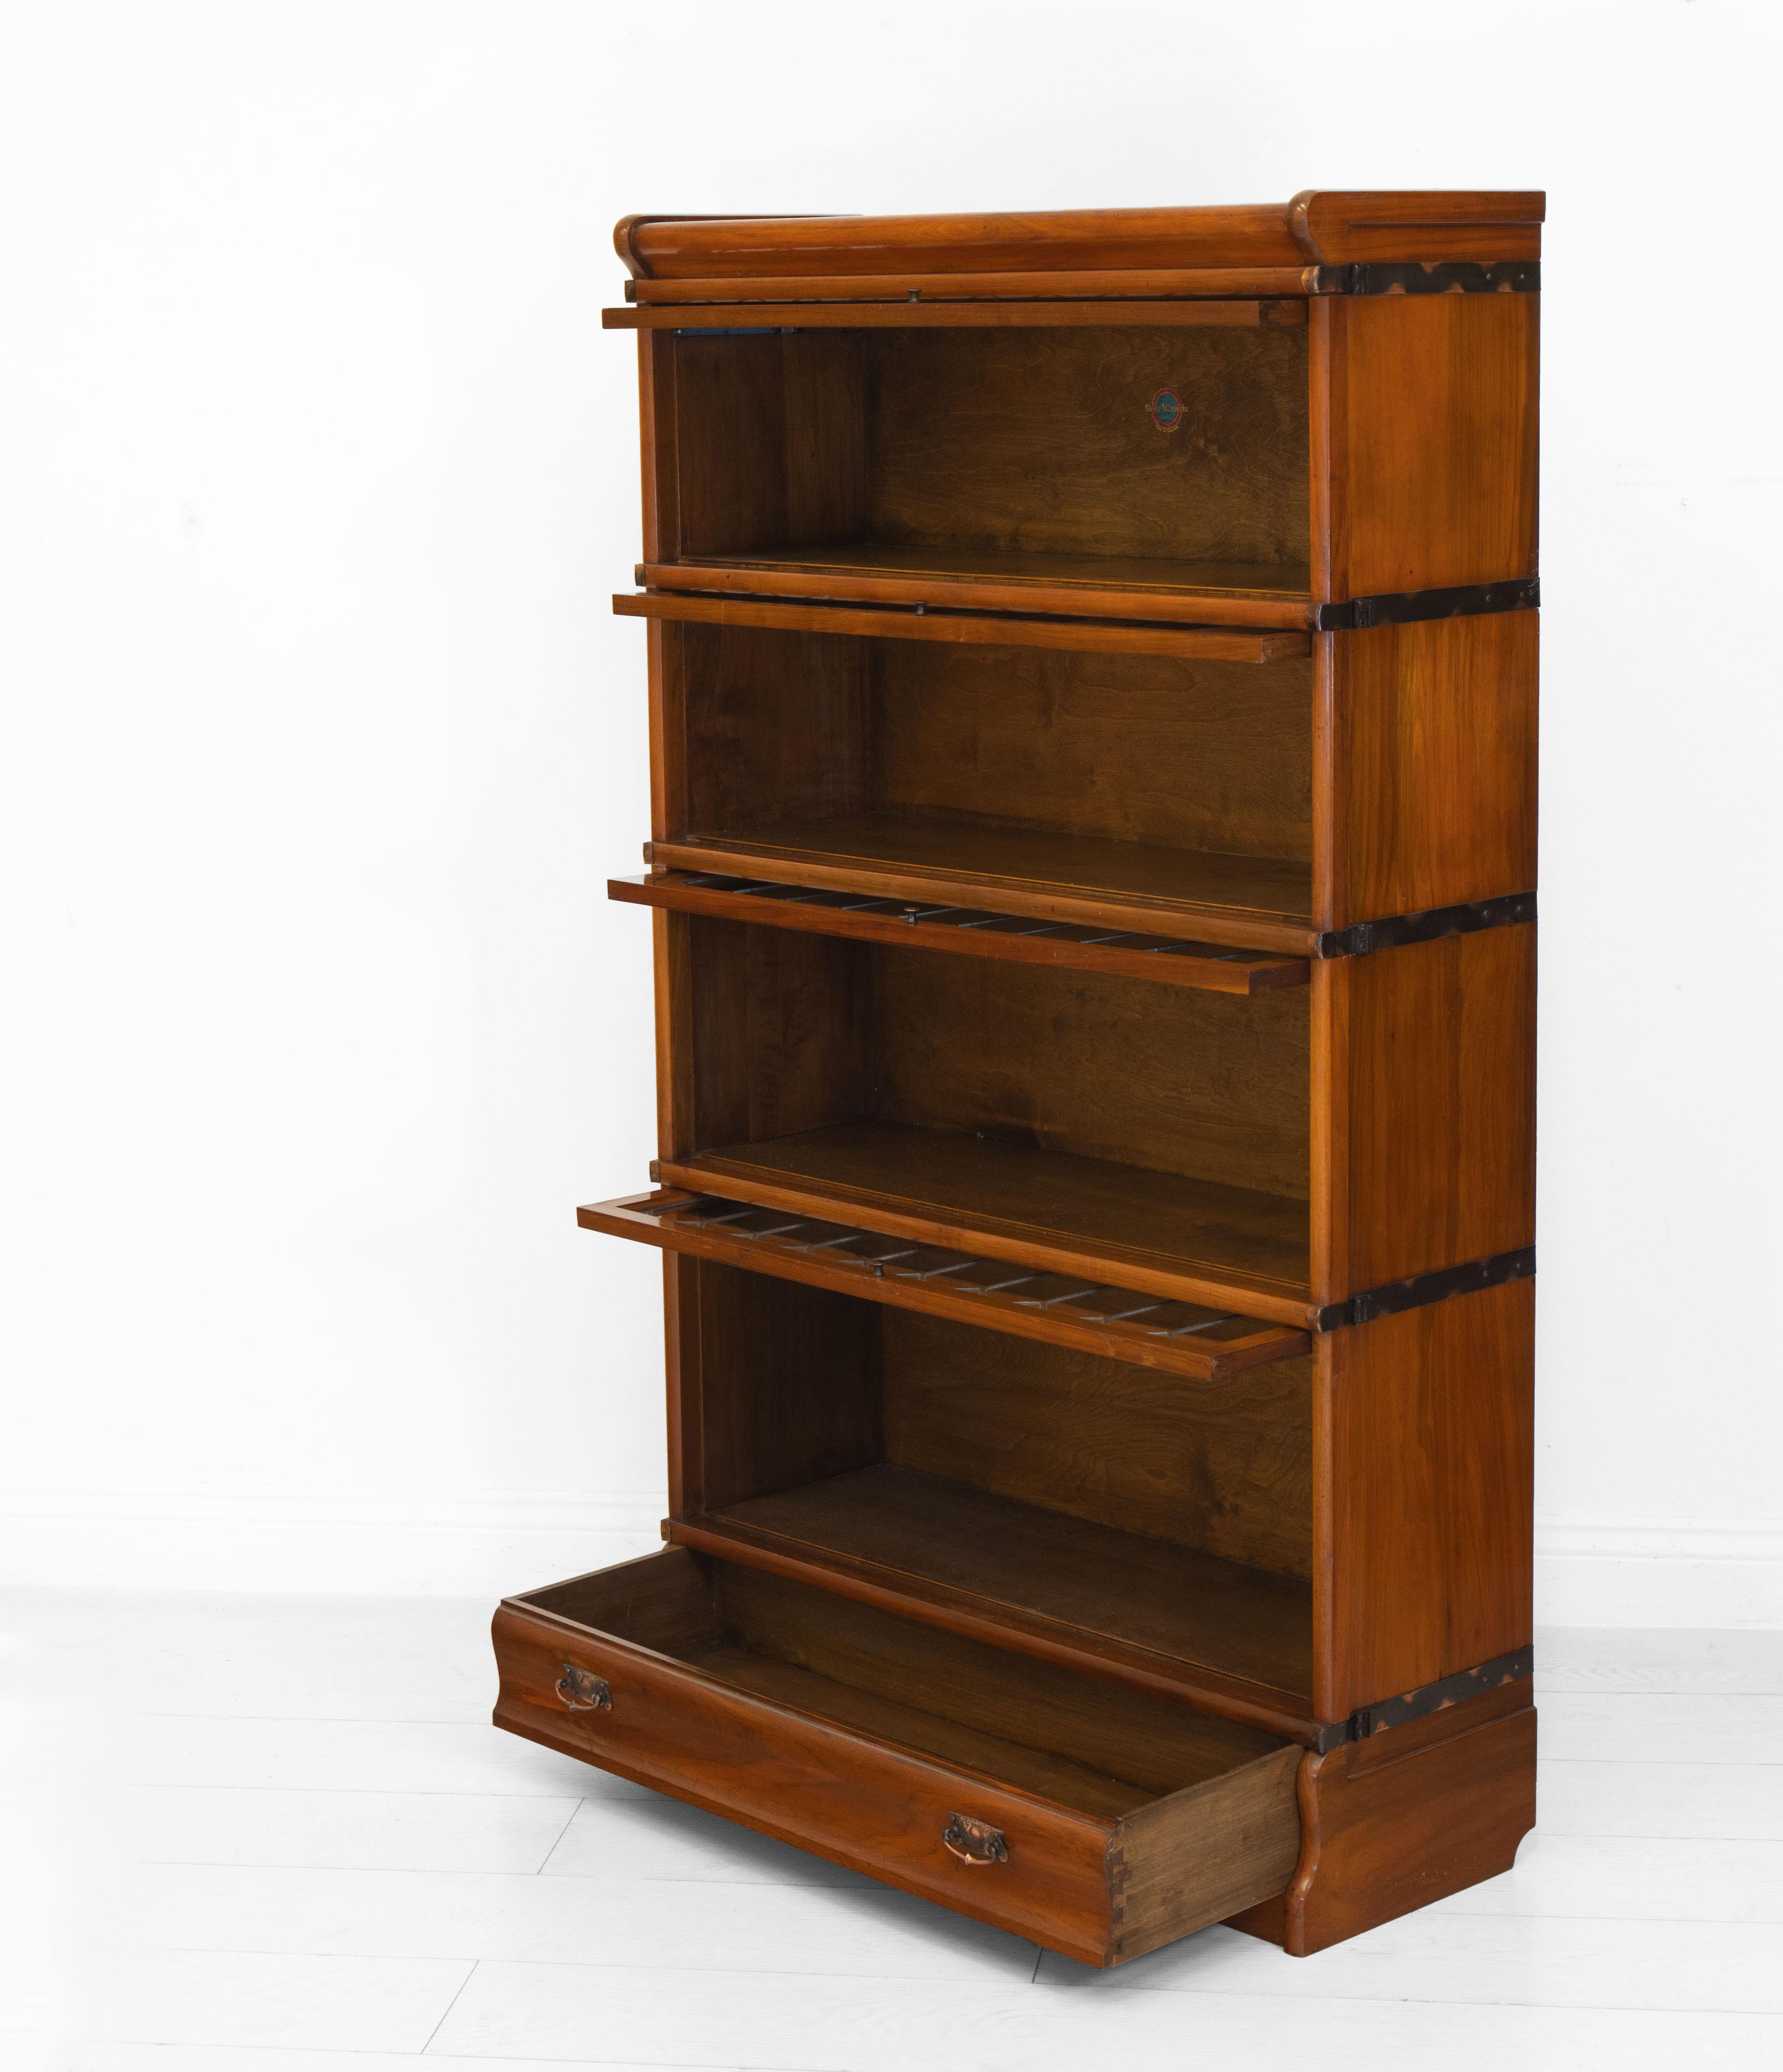 An English antique solid walnut four sectional bookcase with drawer by Globe Wernicke, England. Transfer label to one section. circa 1905.

Made in solid walnut with copperised metal side fittings and handles on both bookcase and drawer. The